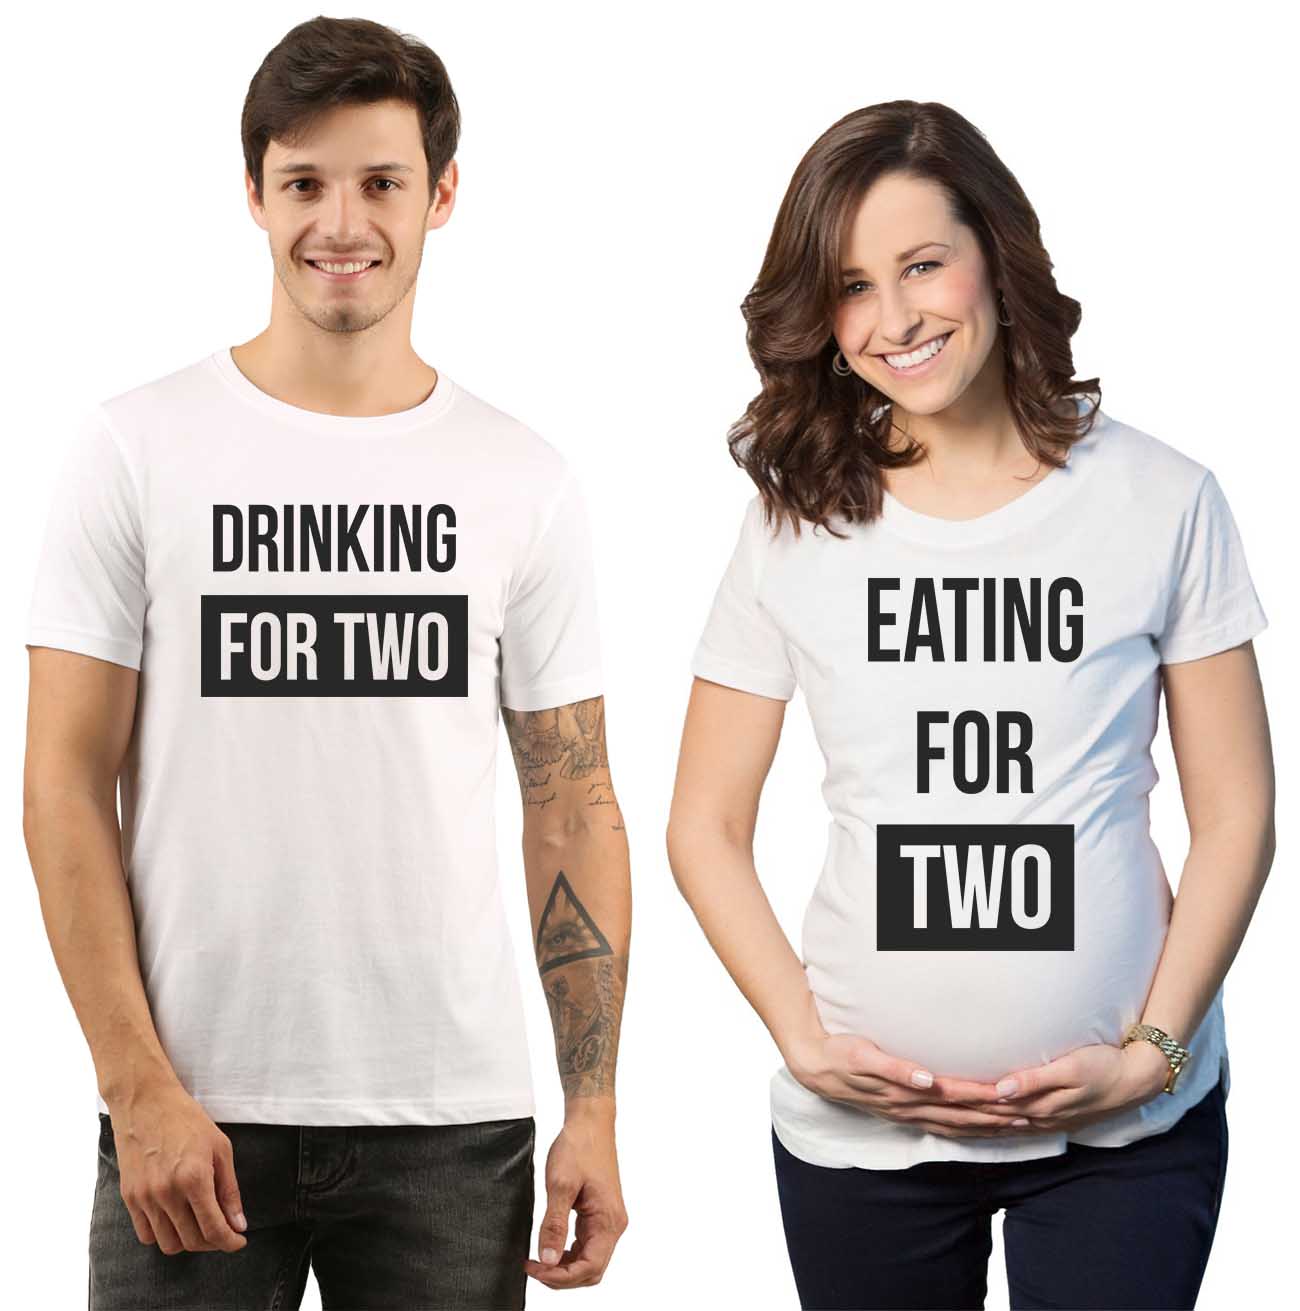 jopo maternity photoshoot ideas poses props indian pregnancy announcement quotes Proud Eating Drinking for two couples goal Matching T-shirts white